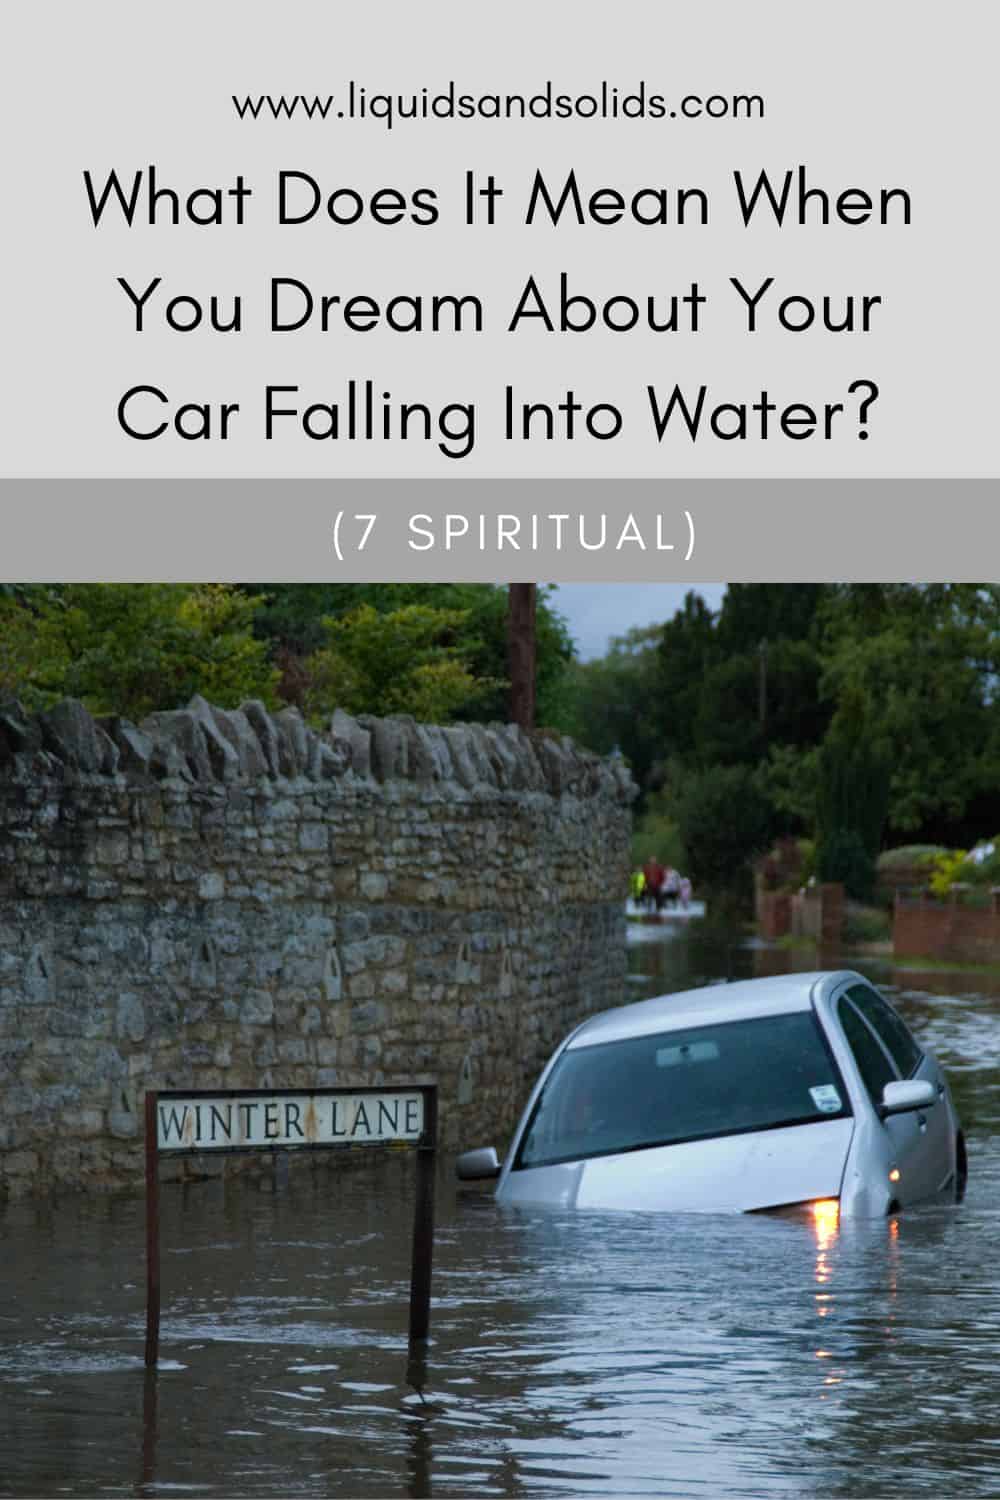 car falling into water dream meaning